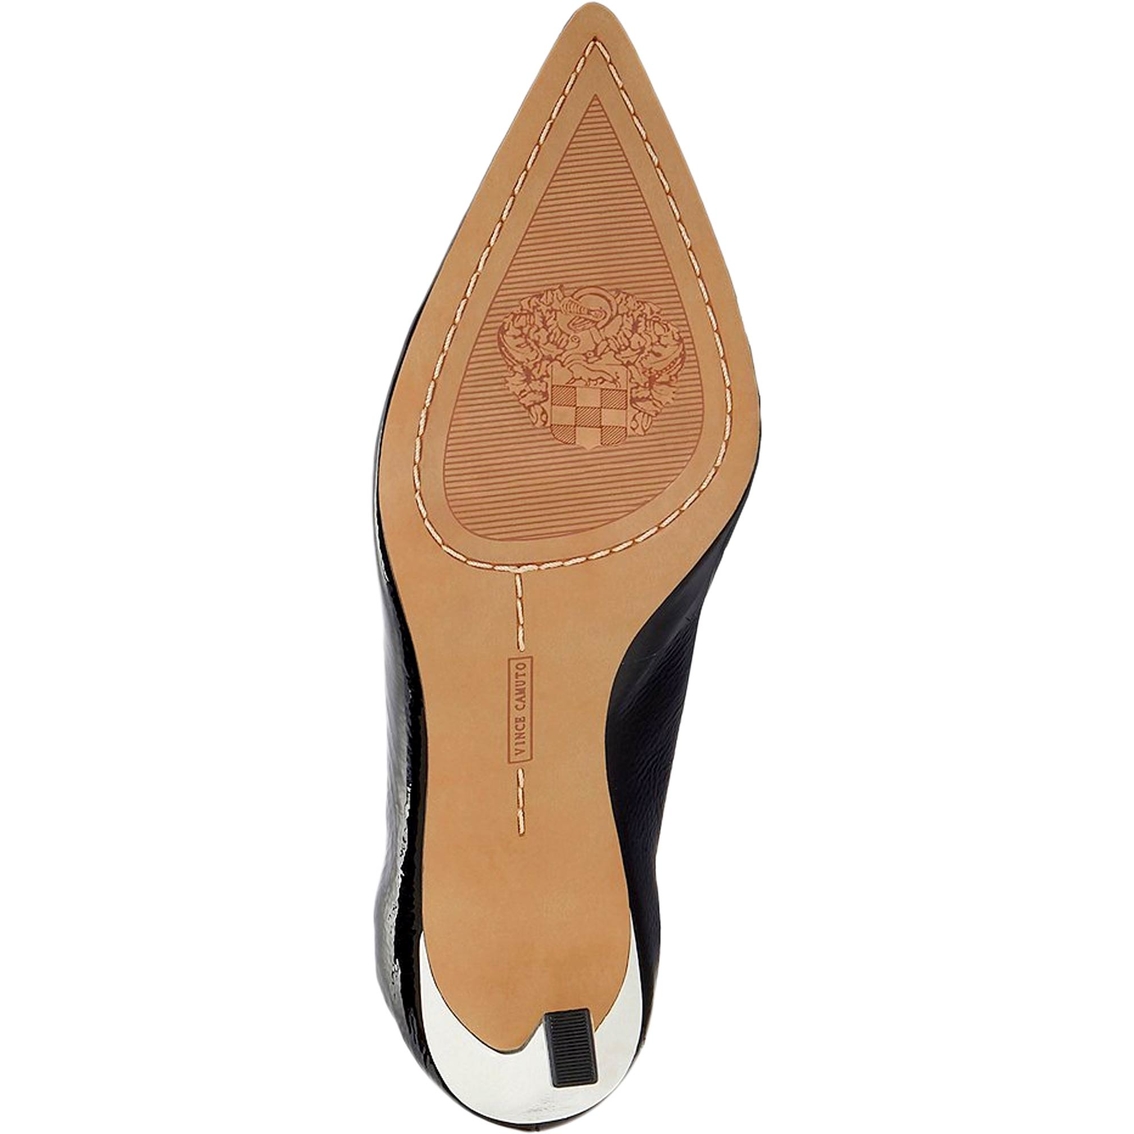 Vince Camuto Restia Pumps - Image 5 of 8